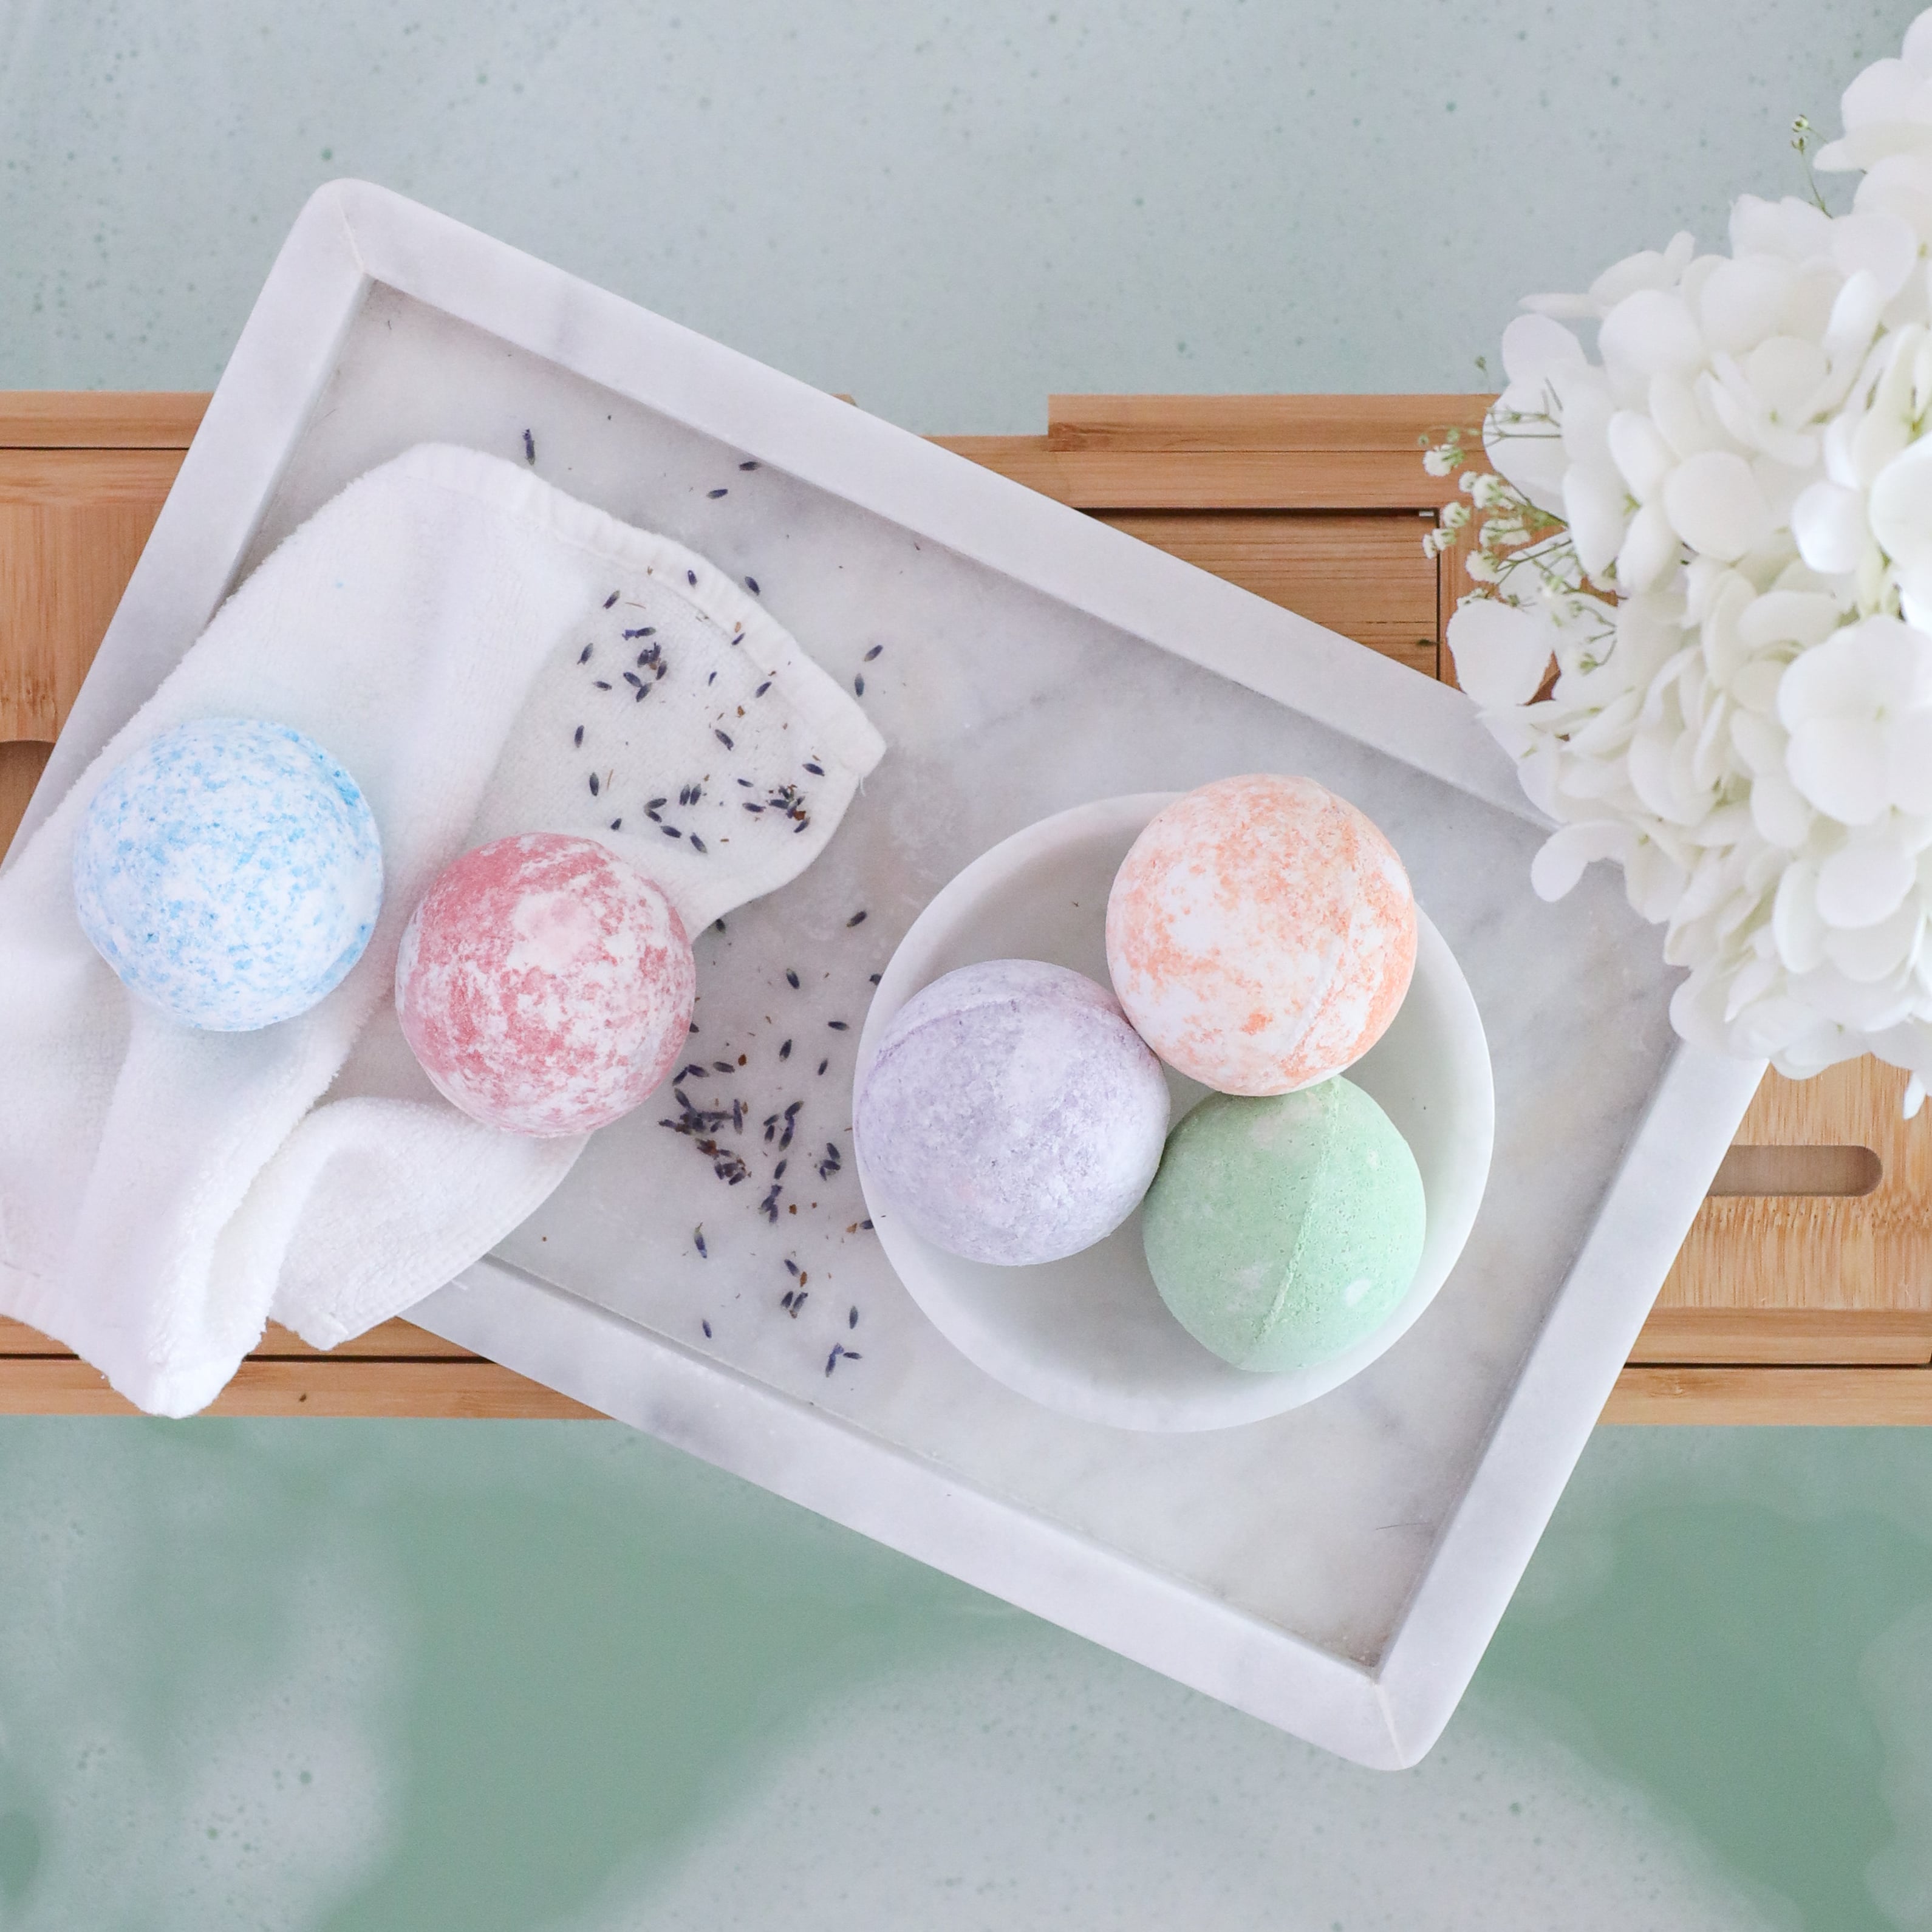 DaBomb Fizzers: Story Behind These Teens' Bath Bomb Company